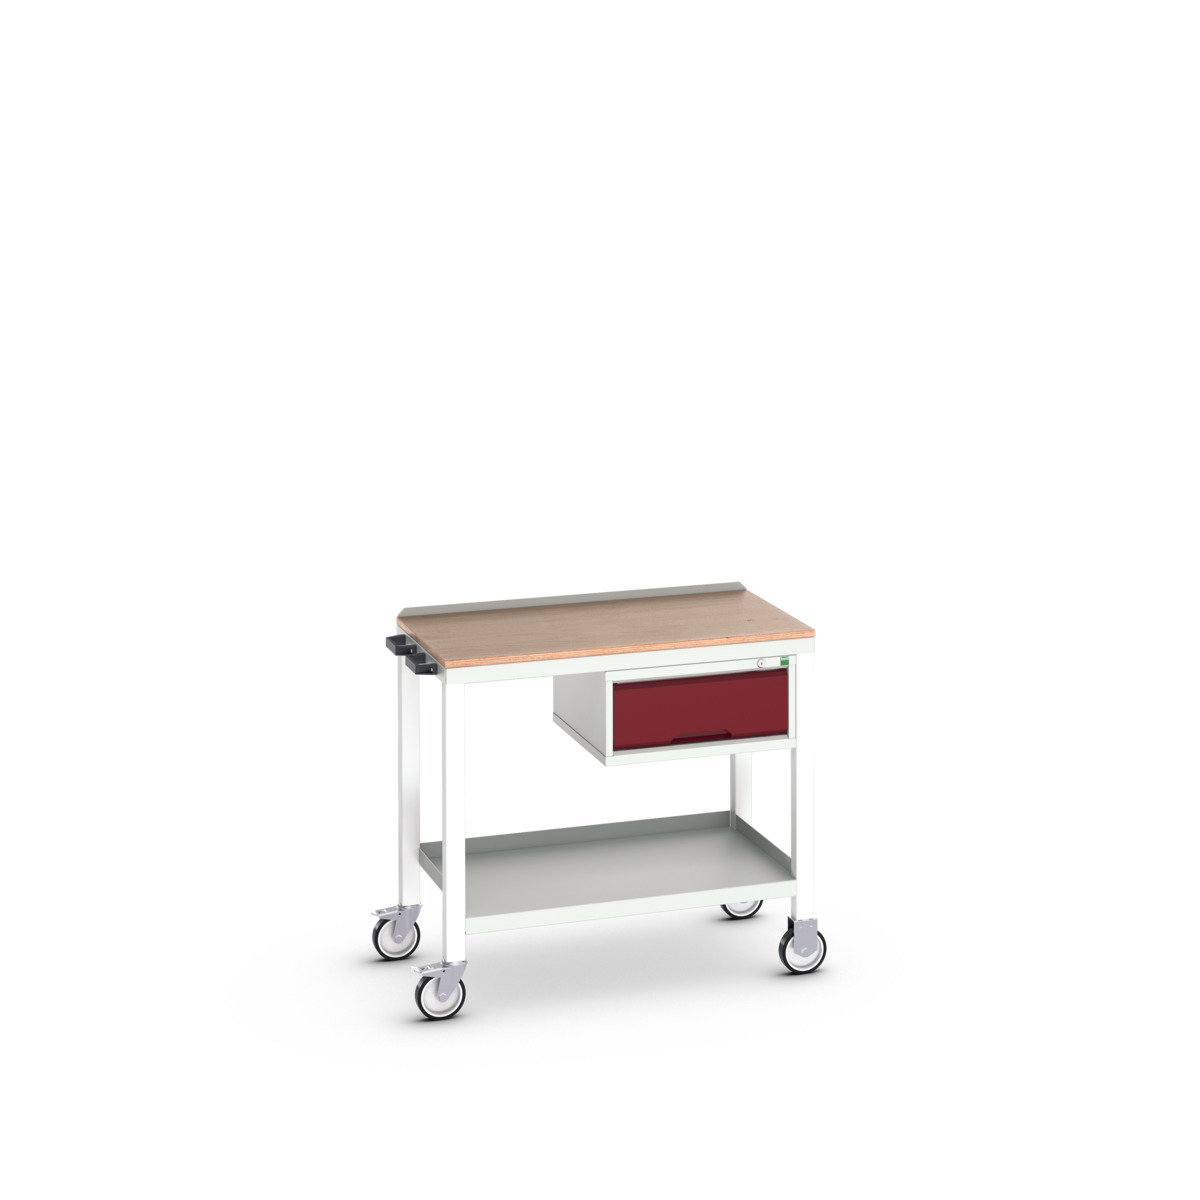 16922801.24 - verso mobile welded bench